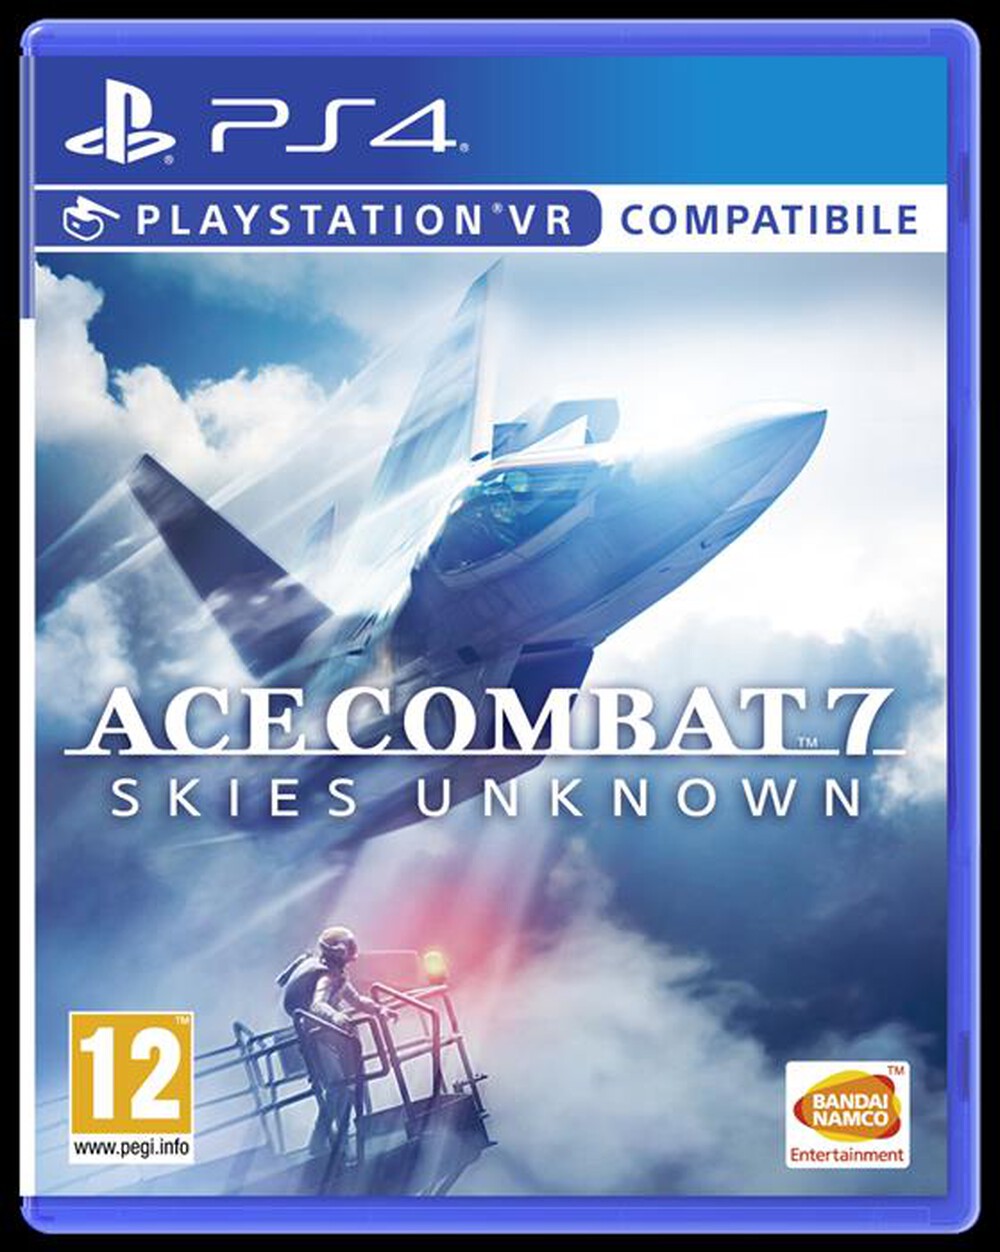 "NAMCO - ACE COMBAT 7: SKIES UNKNOWN PS4"